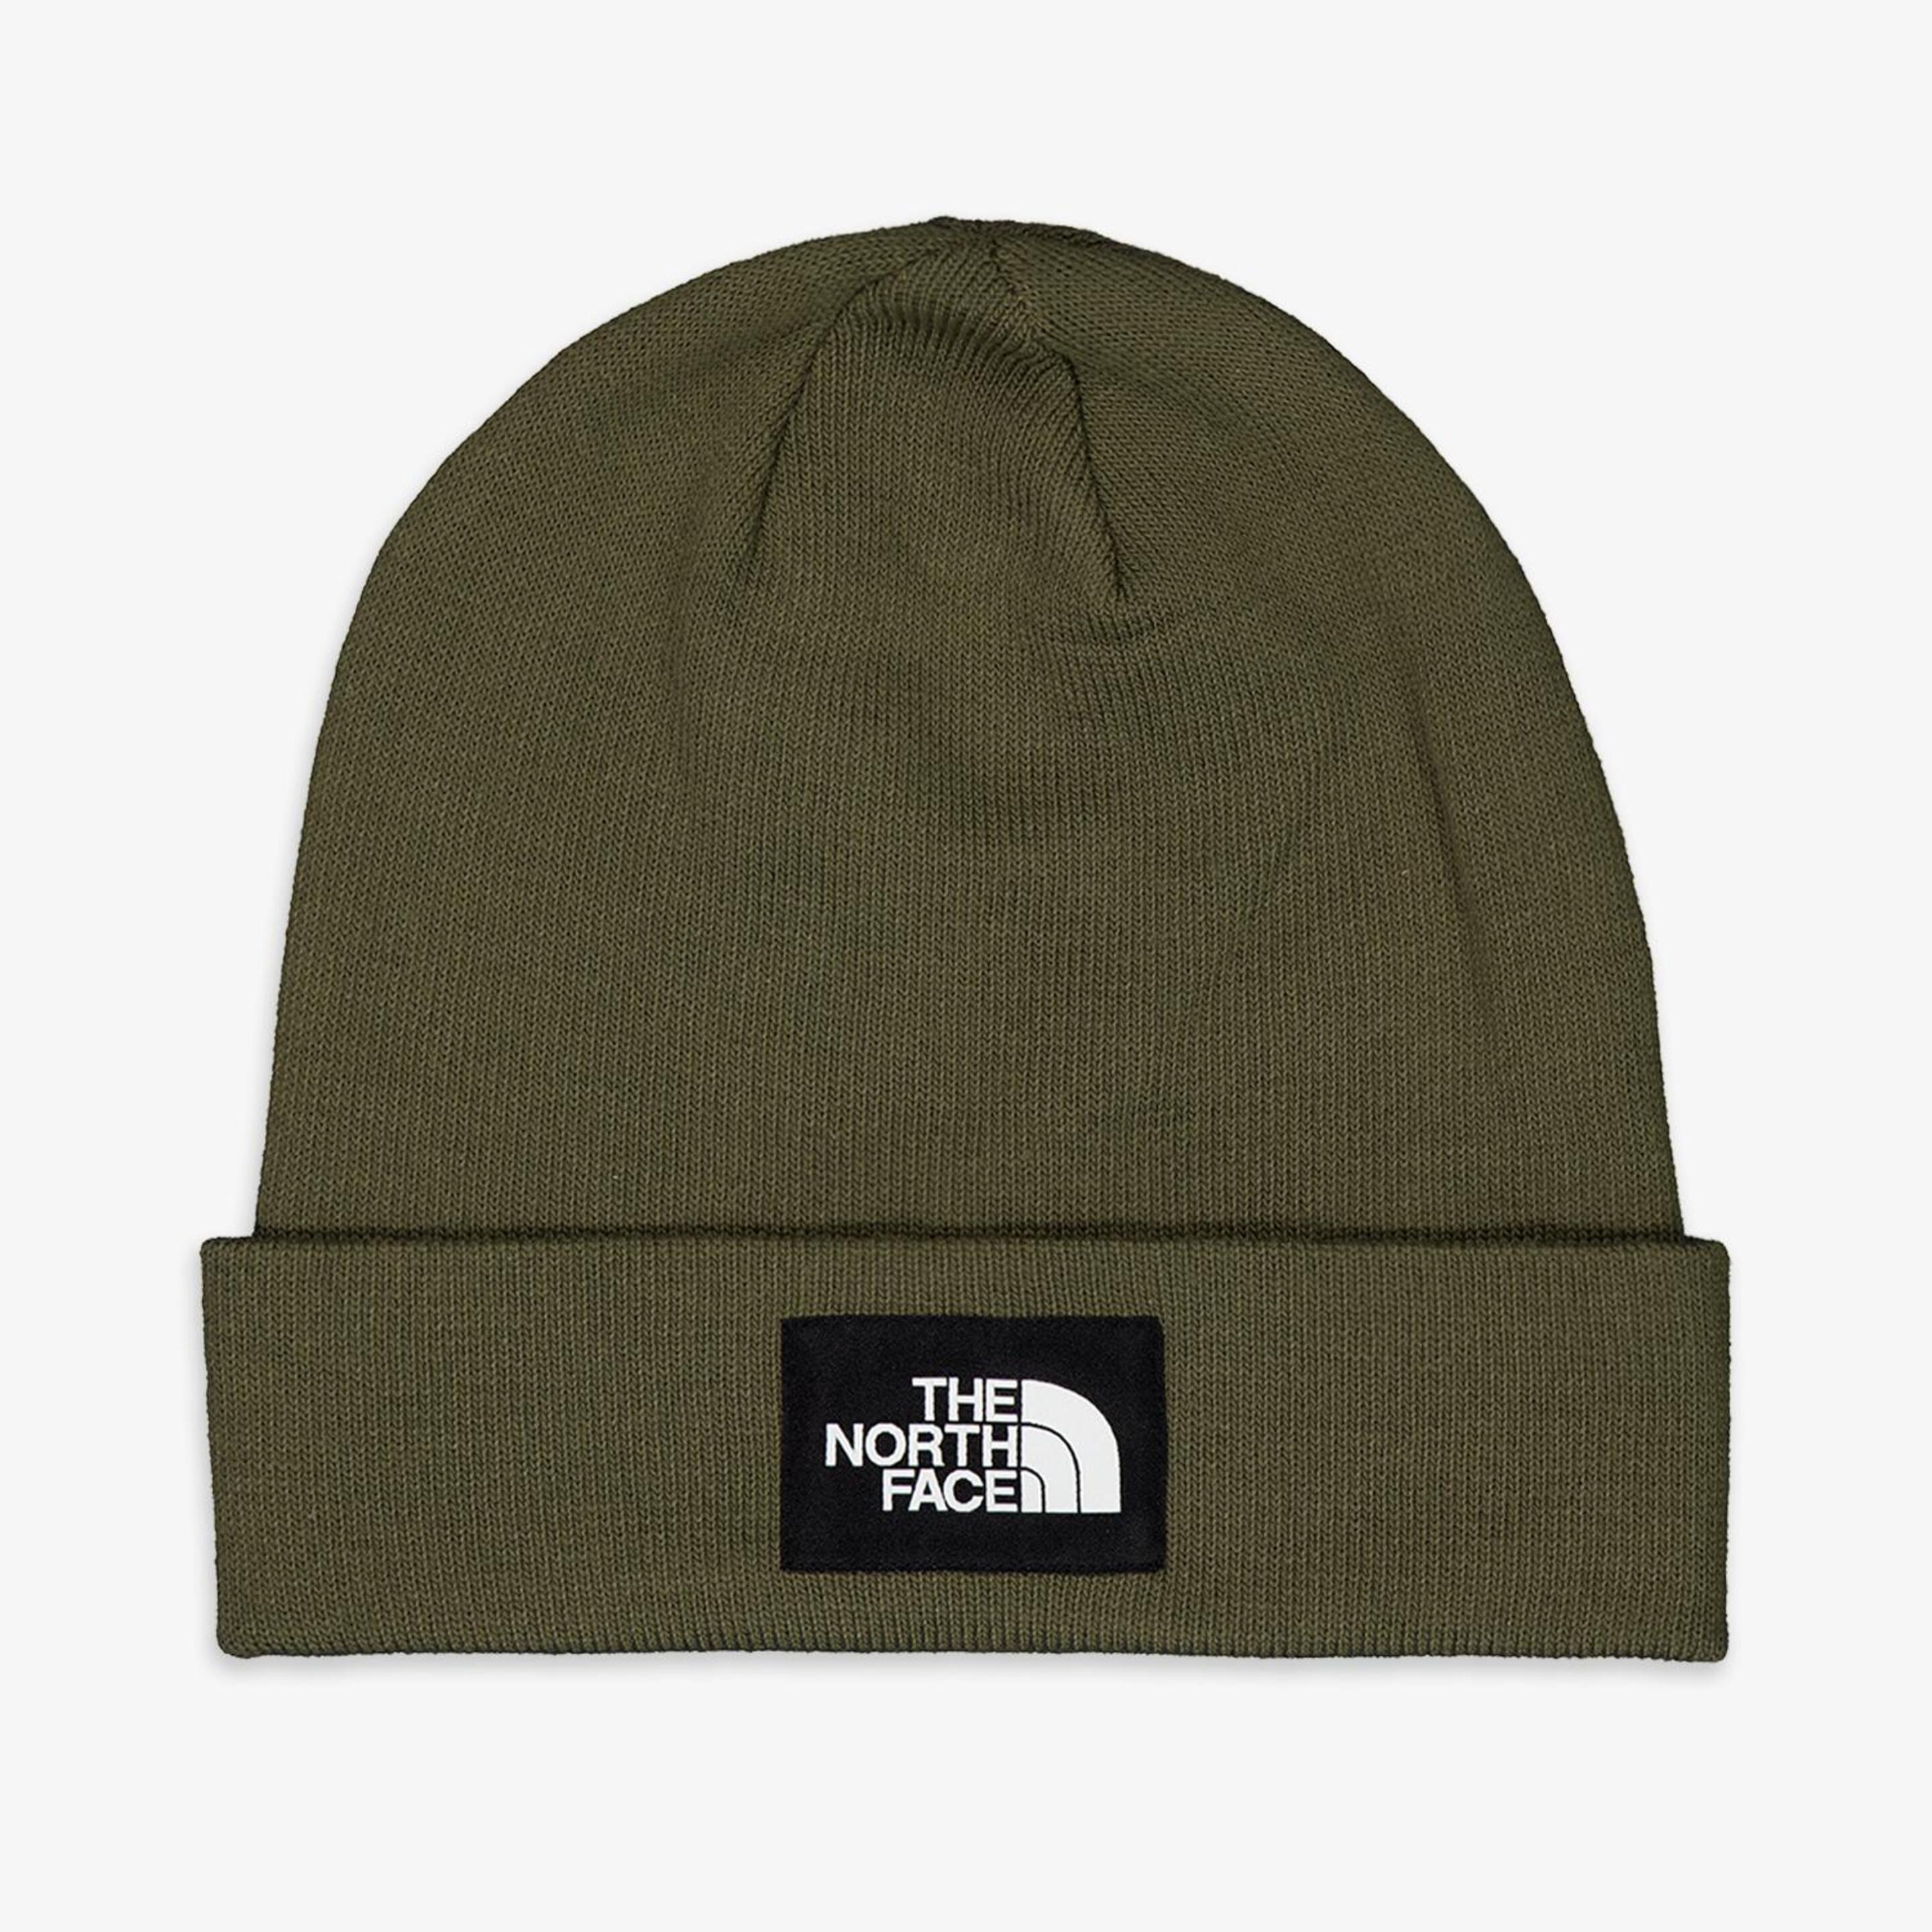 The North Face Dock Worker Recycled - verde - Gorro Montaña Unisex